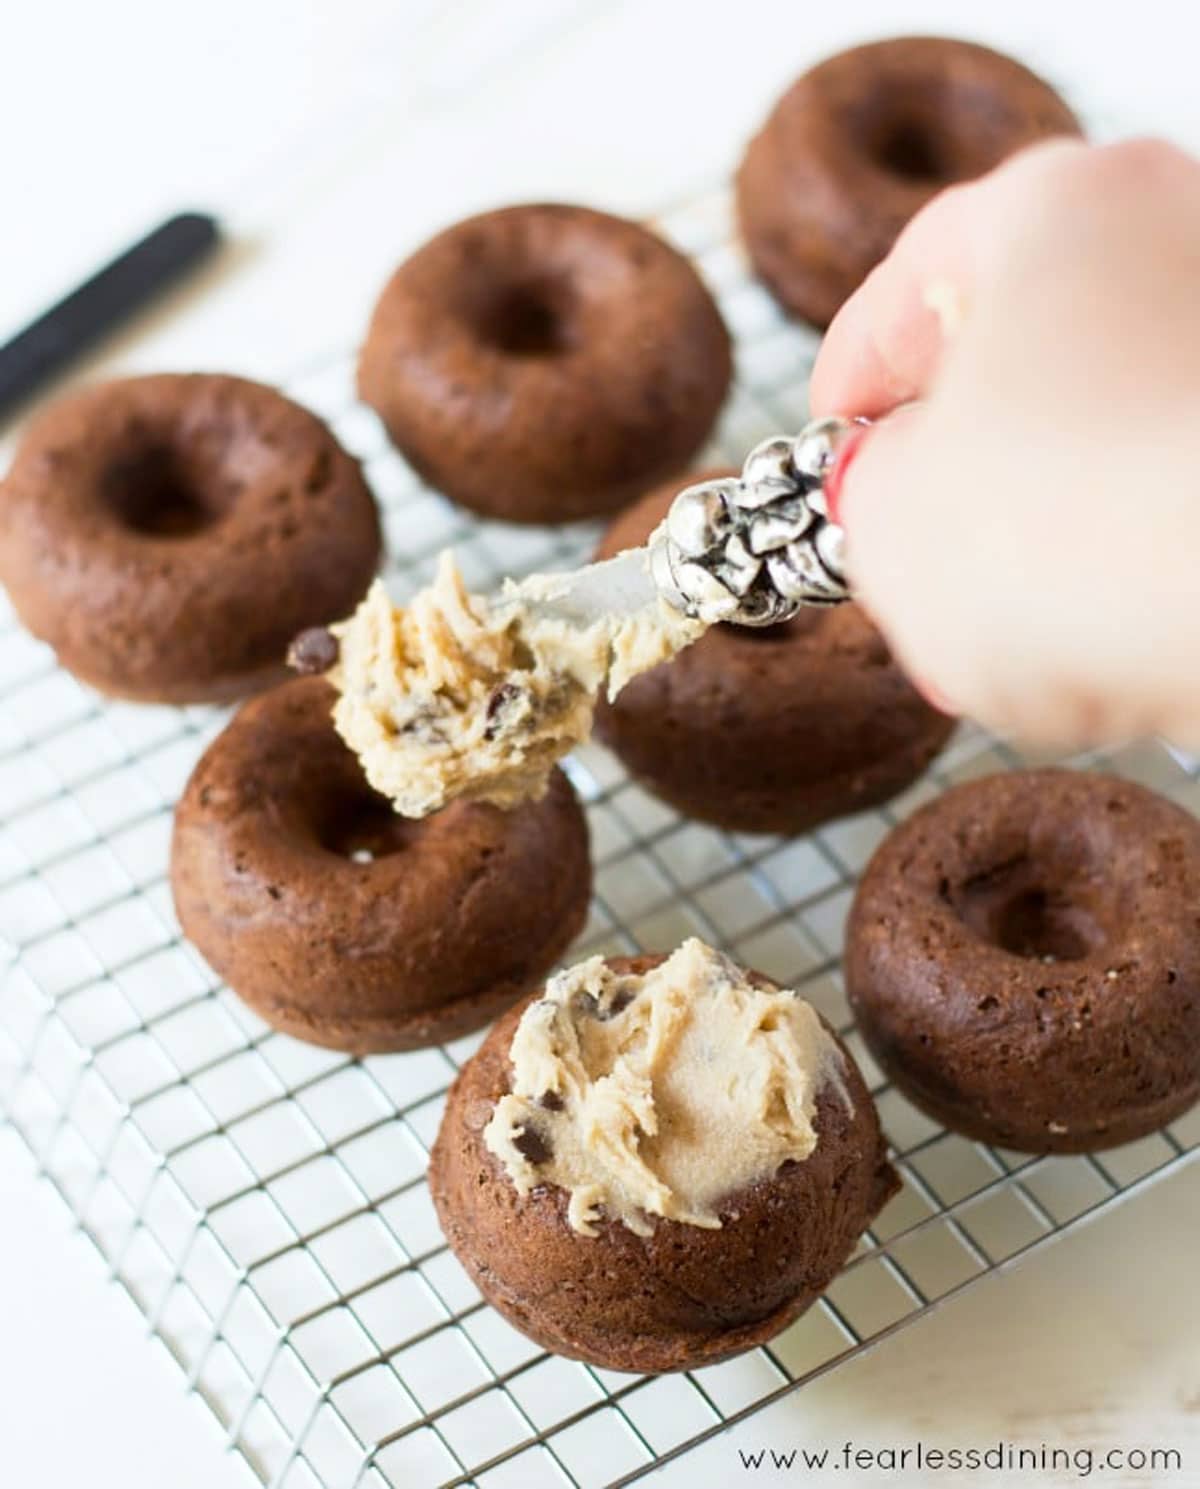 Spreading cookie dough frosting on mini chocolate donuts.